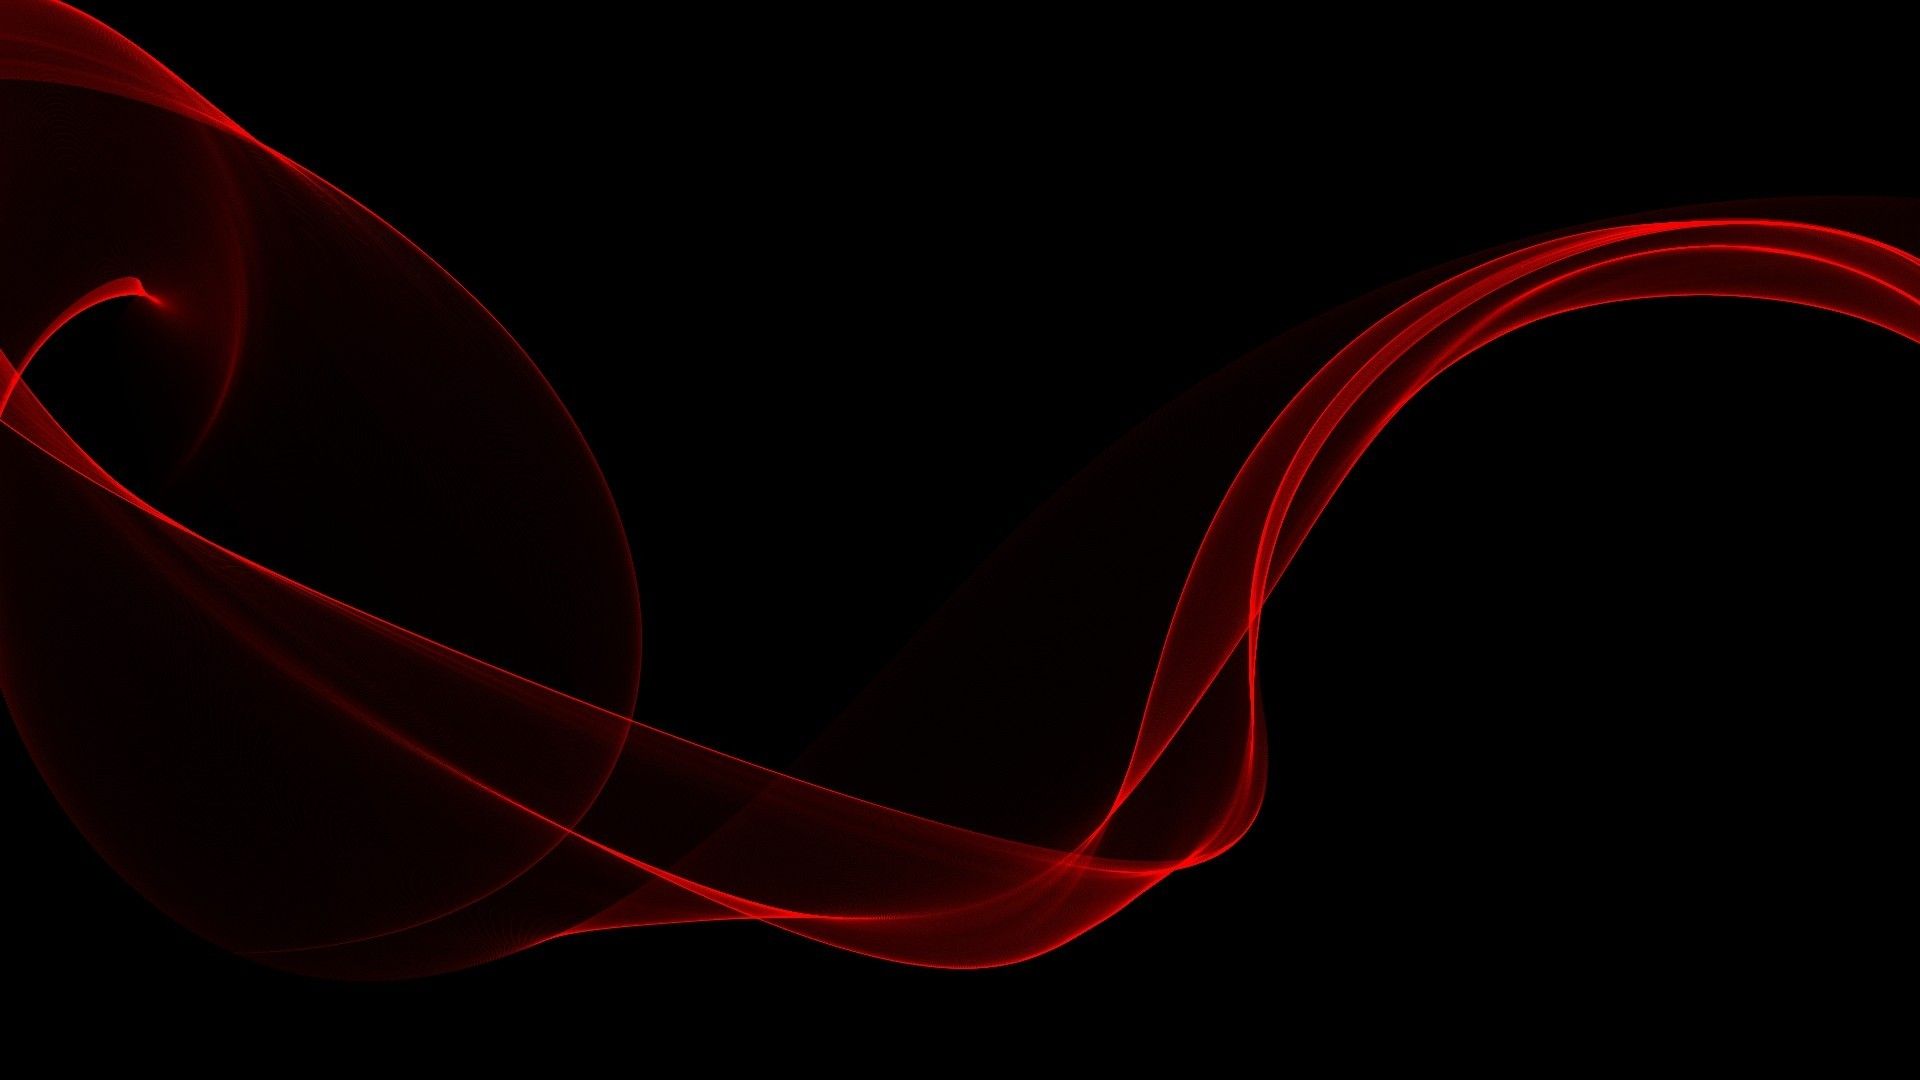 Black and Red Background Wallpaper HD Live Wallpaper HD